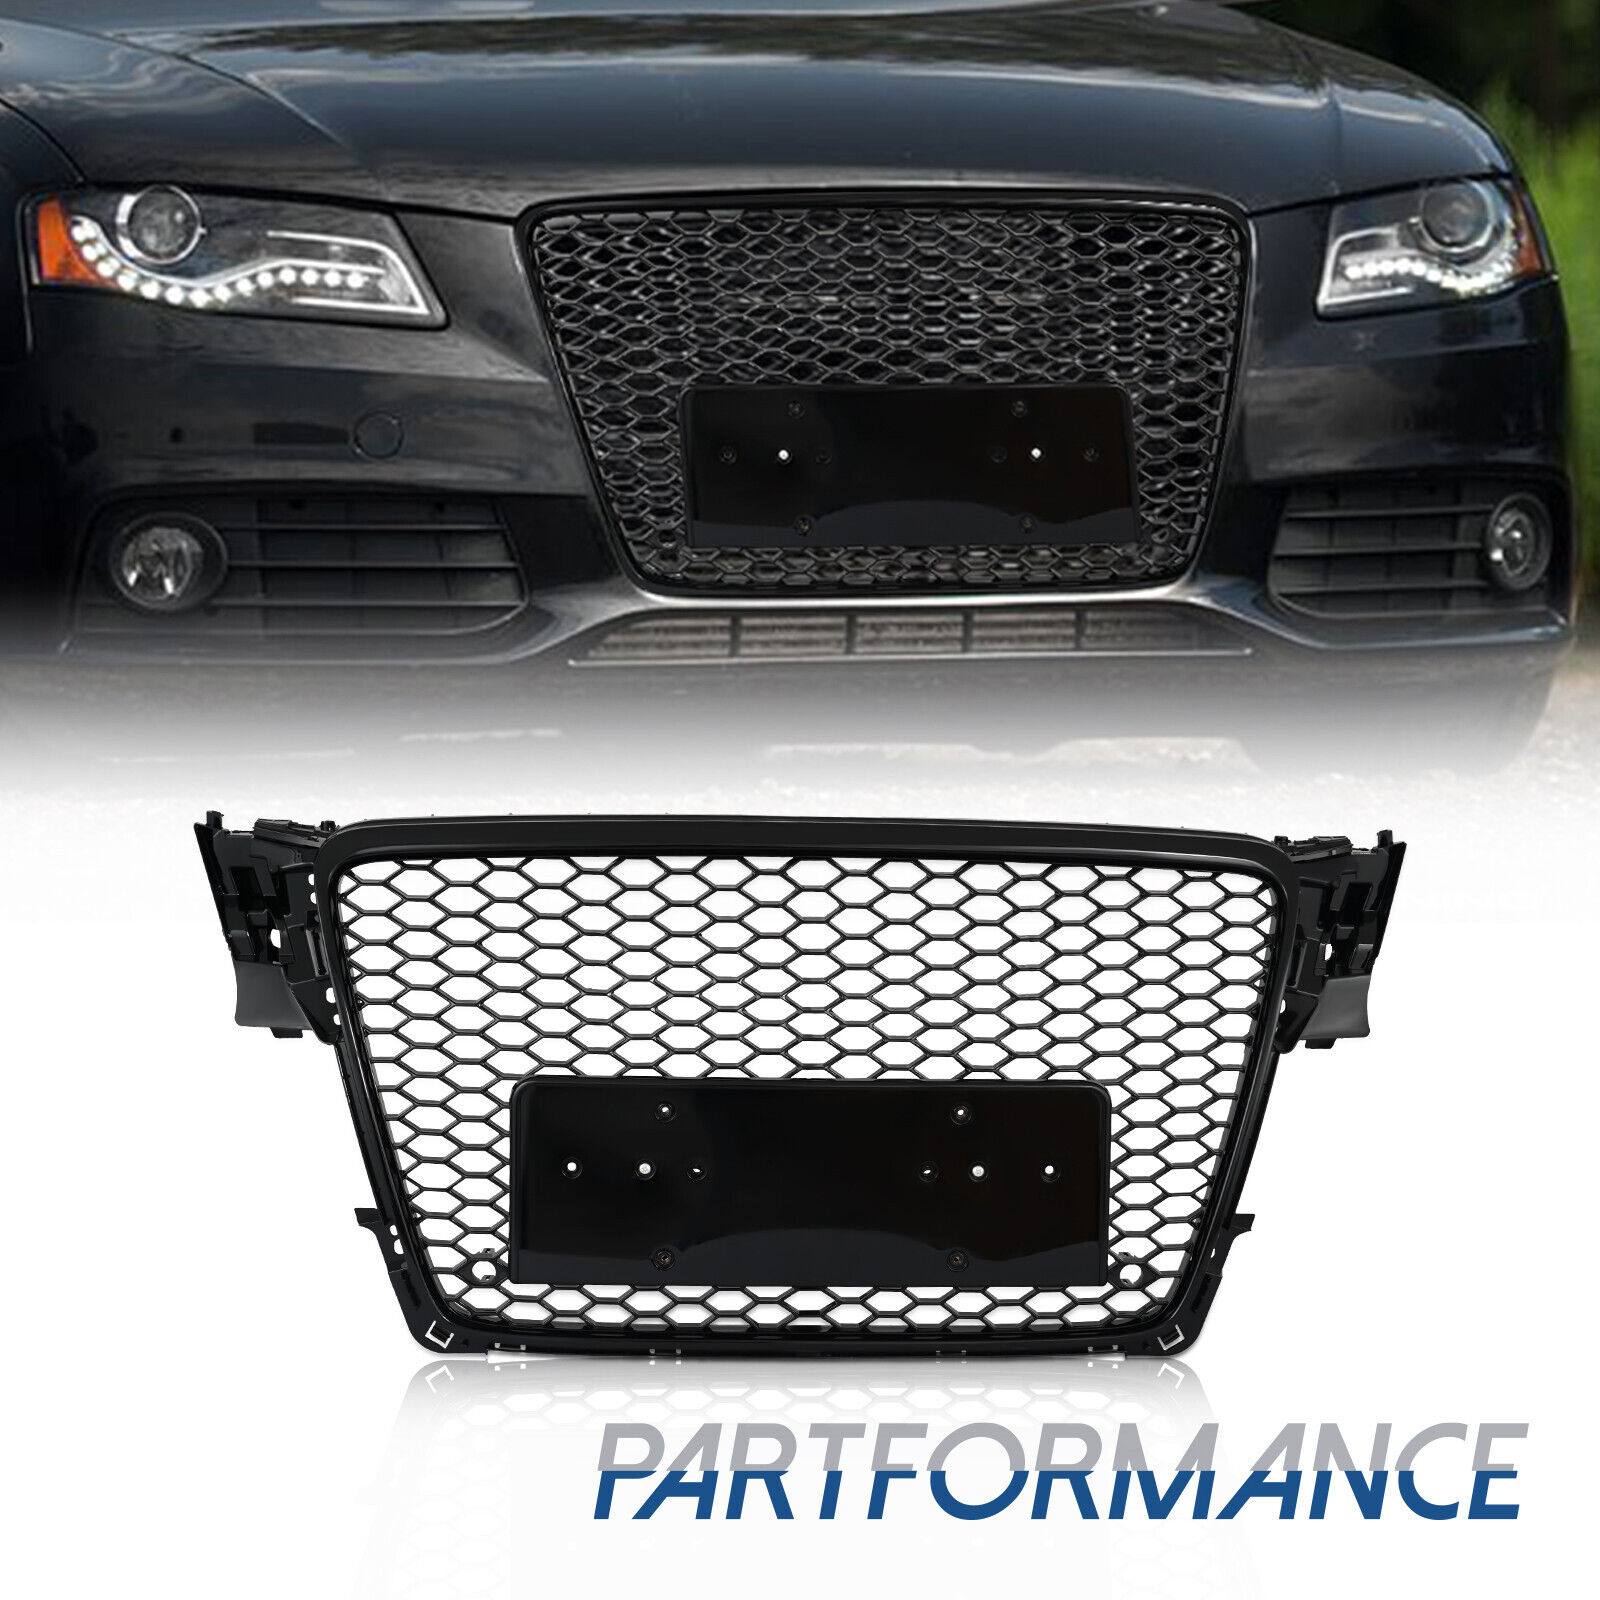 Fit for 2009-12 Audi A4/S4 B8 Front Bumper Hex Grille Mesh RS4 Style Gloss Black